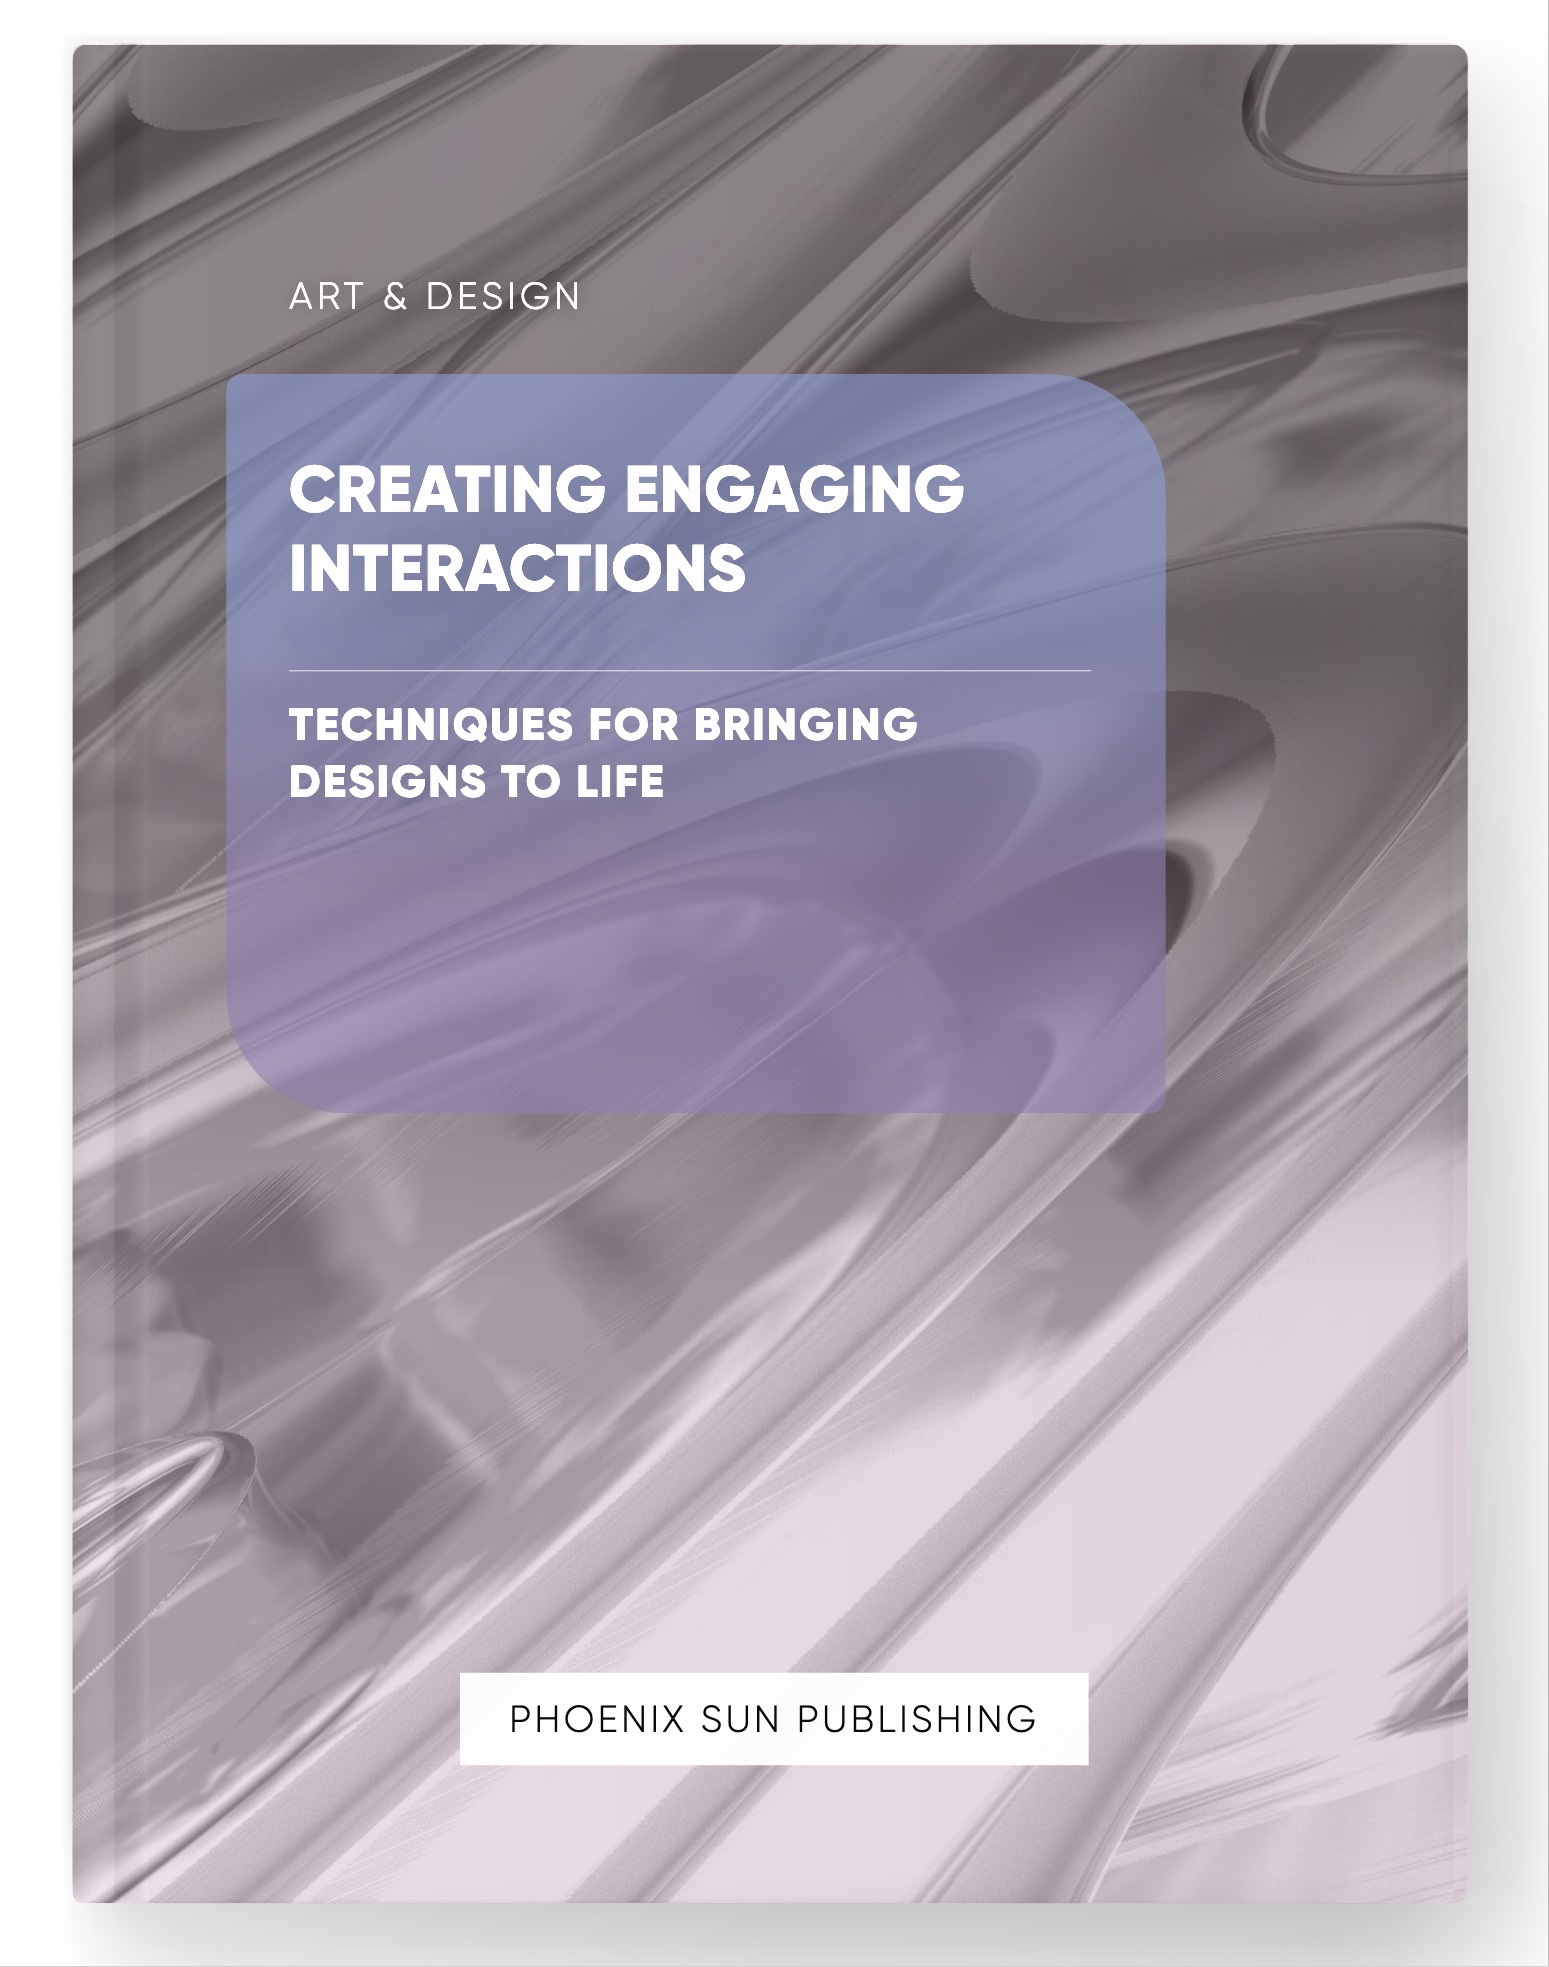 Creating Engaging Interactions – Techniques for Bringing Designs to Life